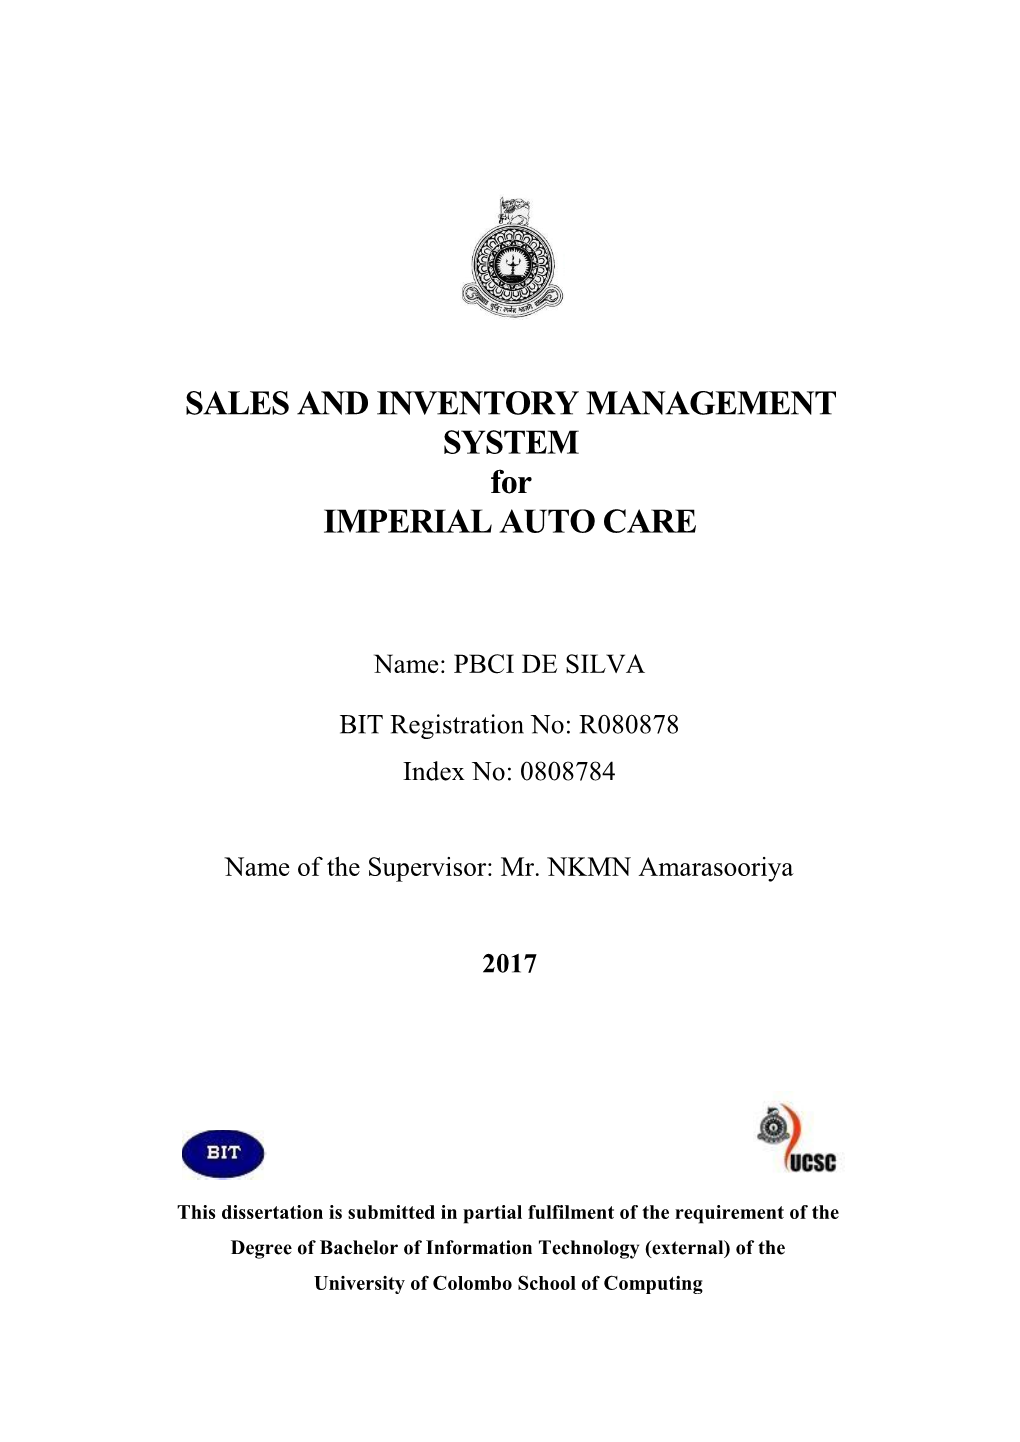 SALES and INVENTORY MANAGEMENT SYSTEM for IMPERIAL AUTO CARE